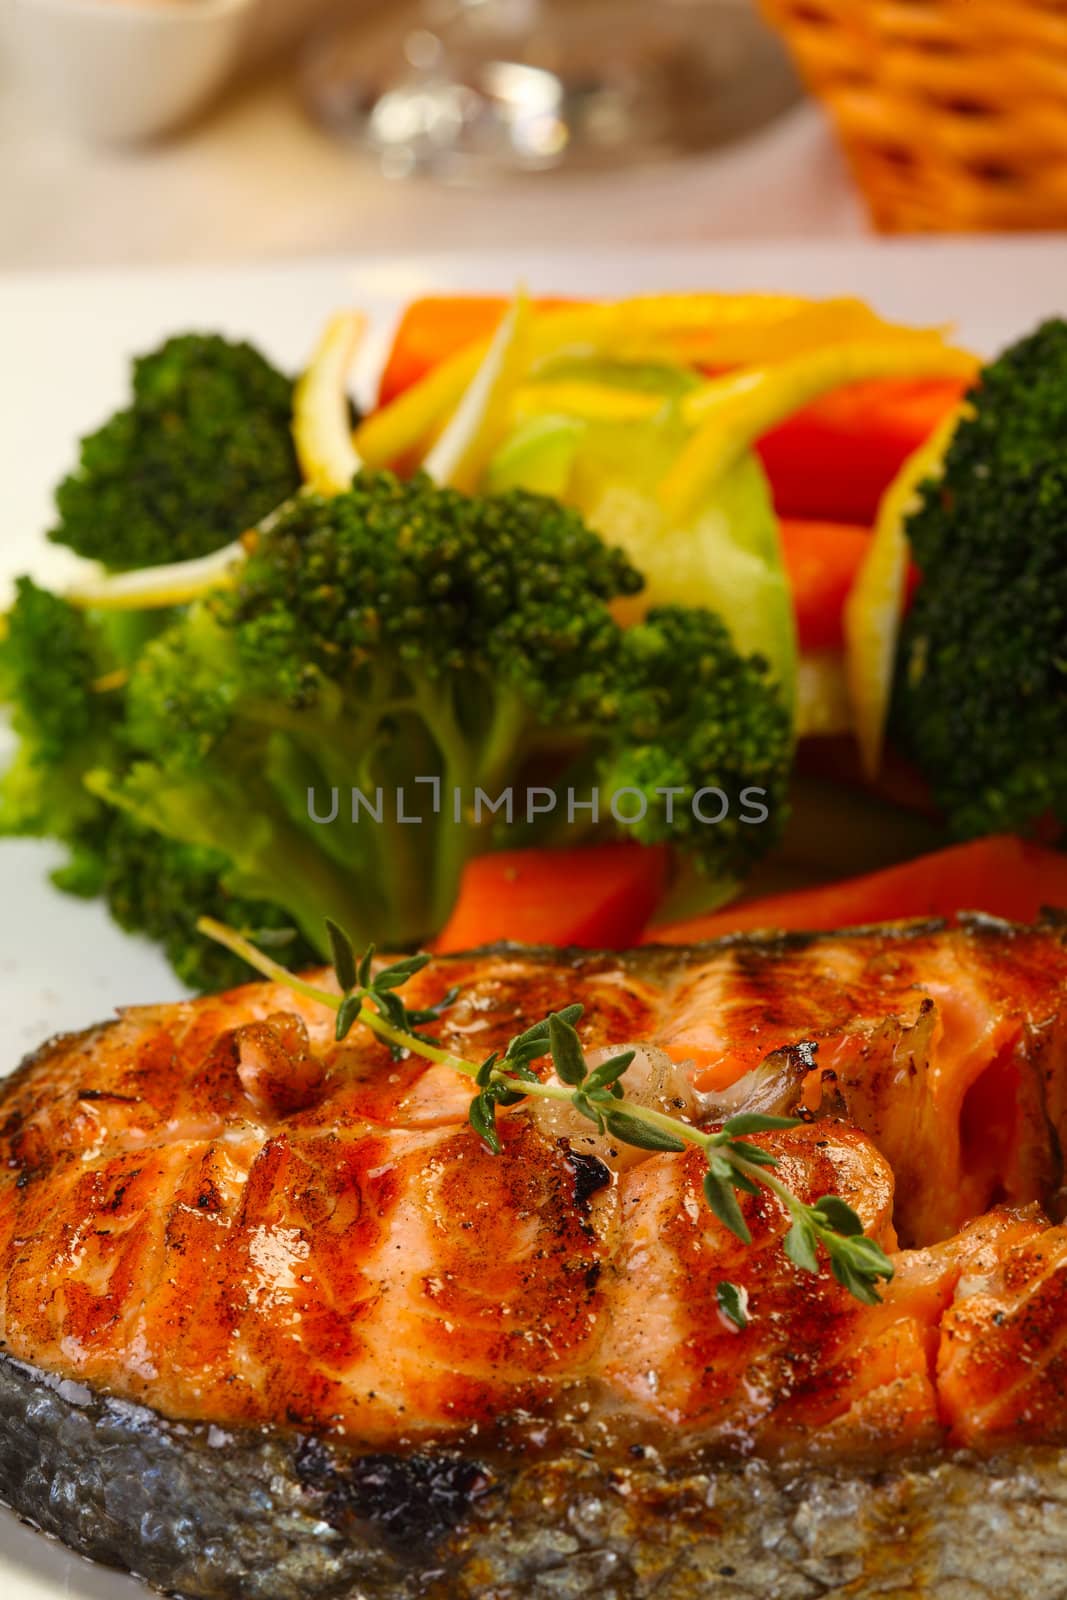 Delicious salmon grilled with brocoli lemon and bread